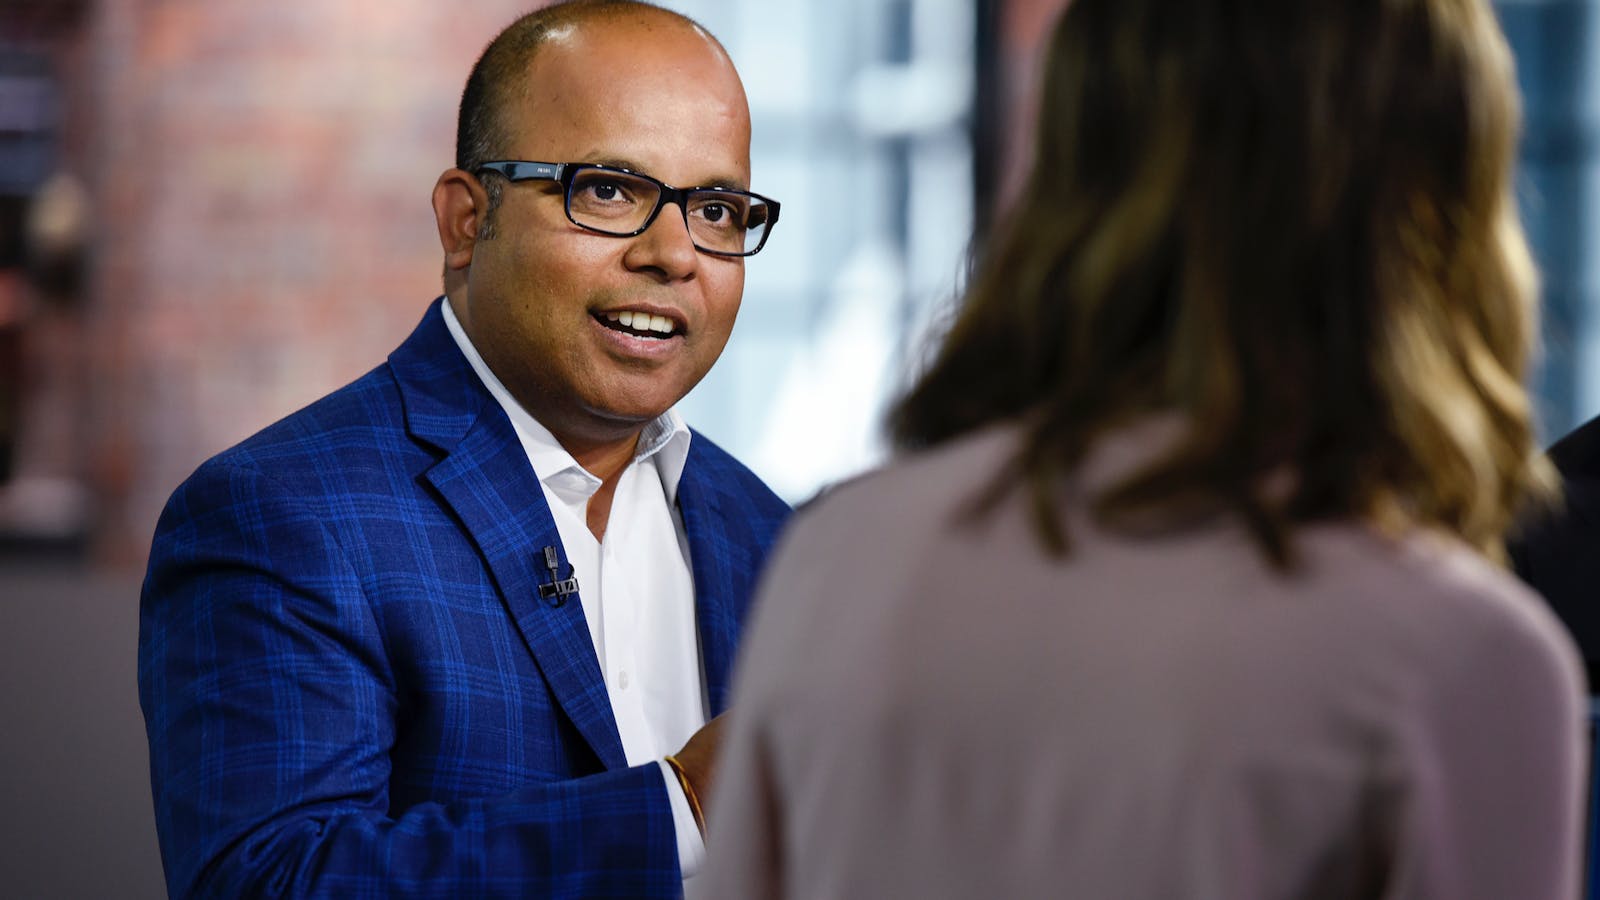 Bipul Sinha, co-founder and CEO of Rubrik. Photo by Bloomberg